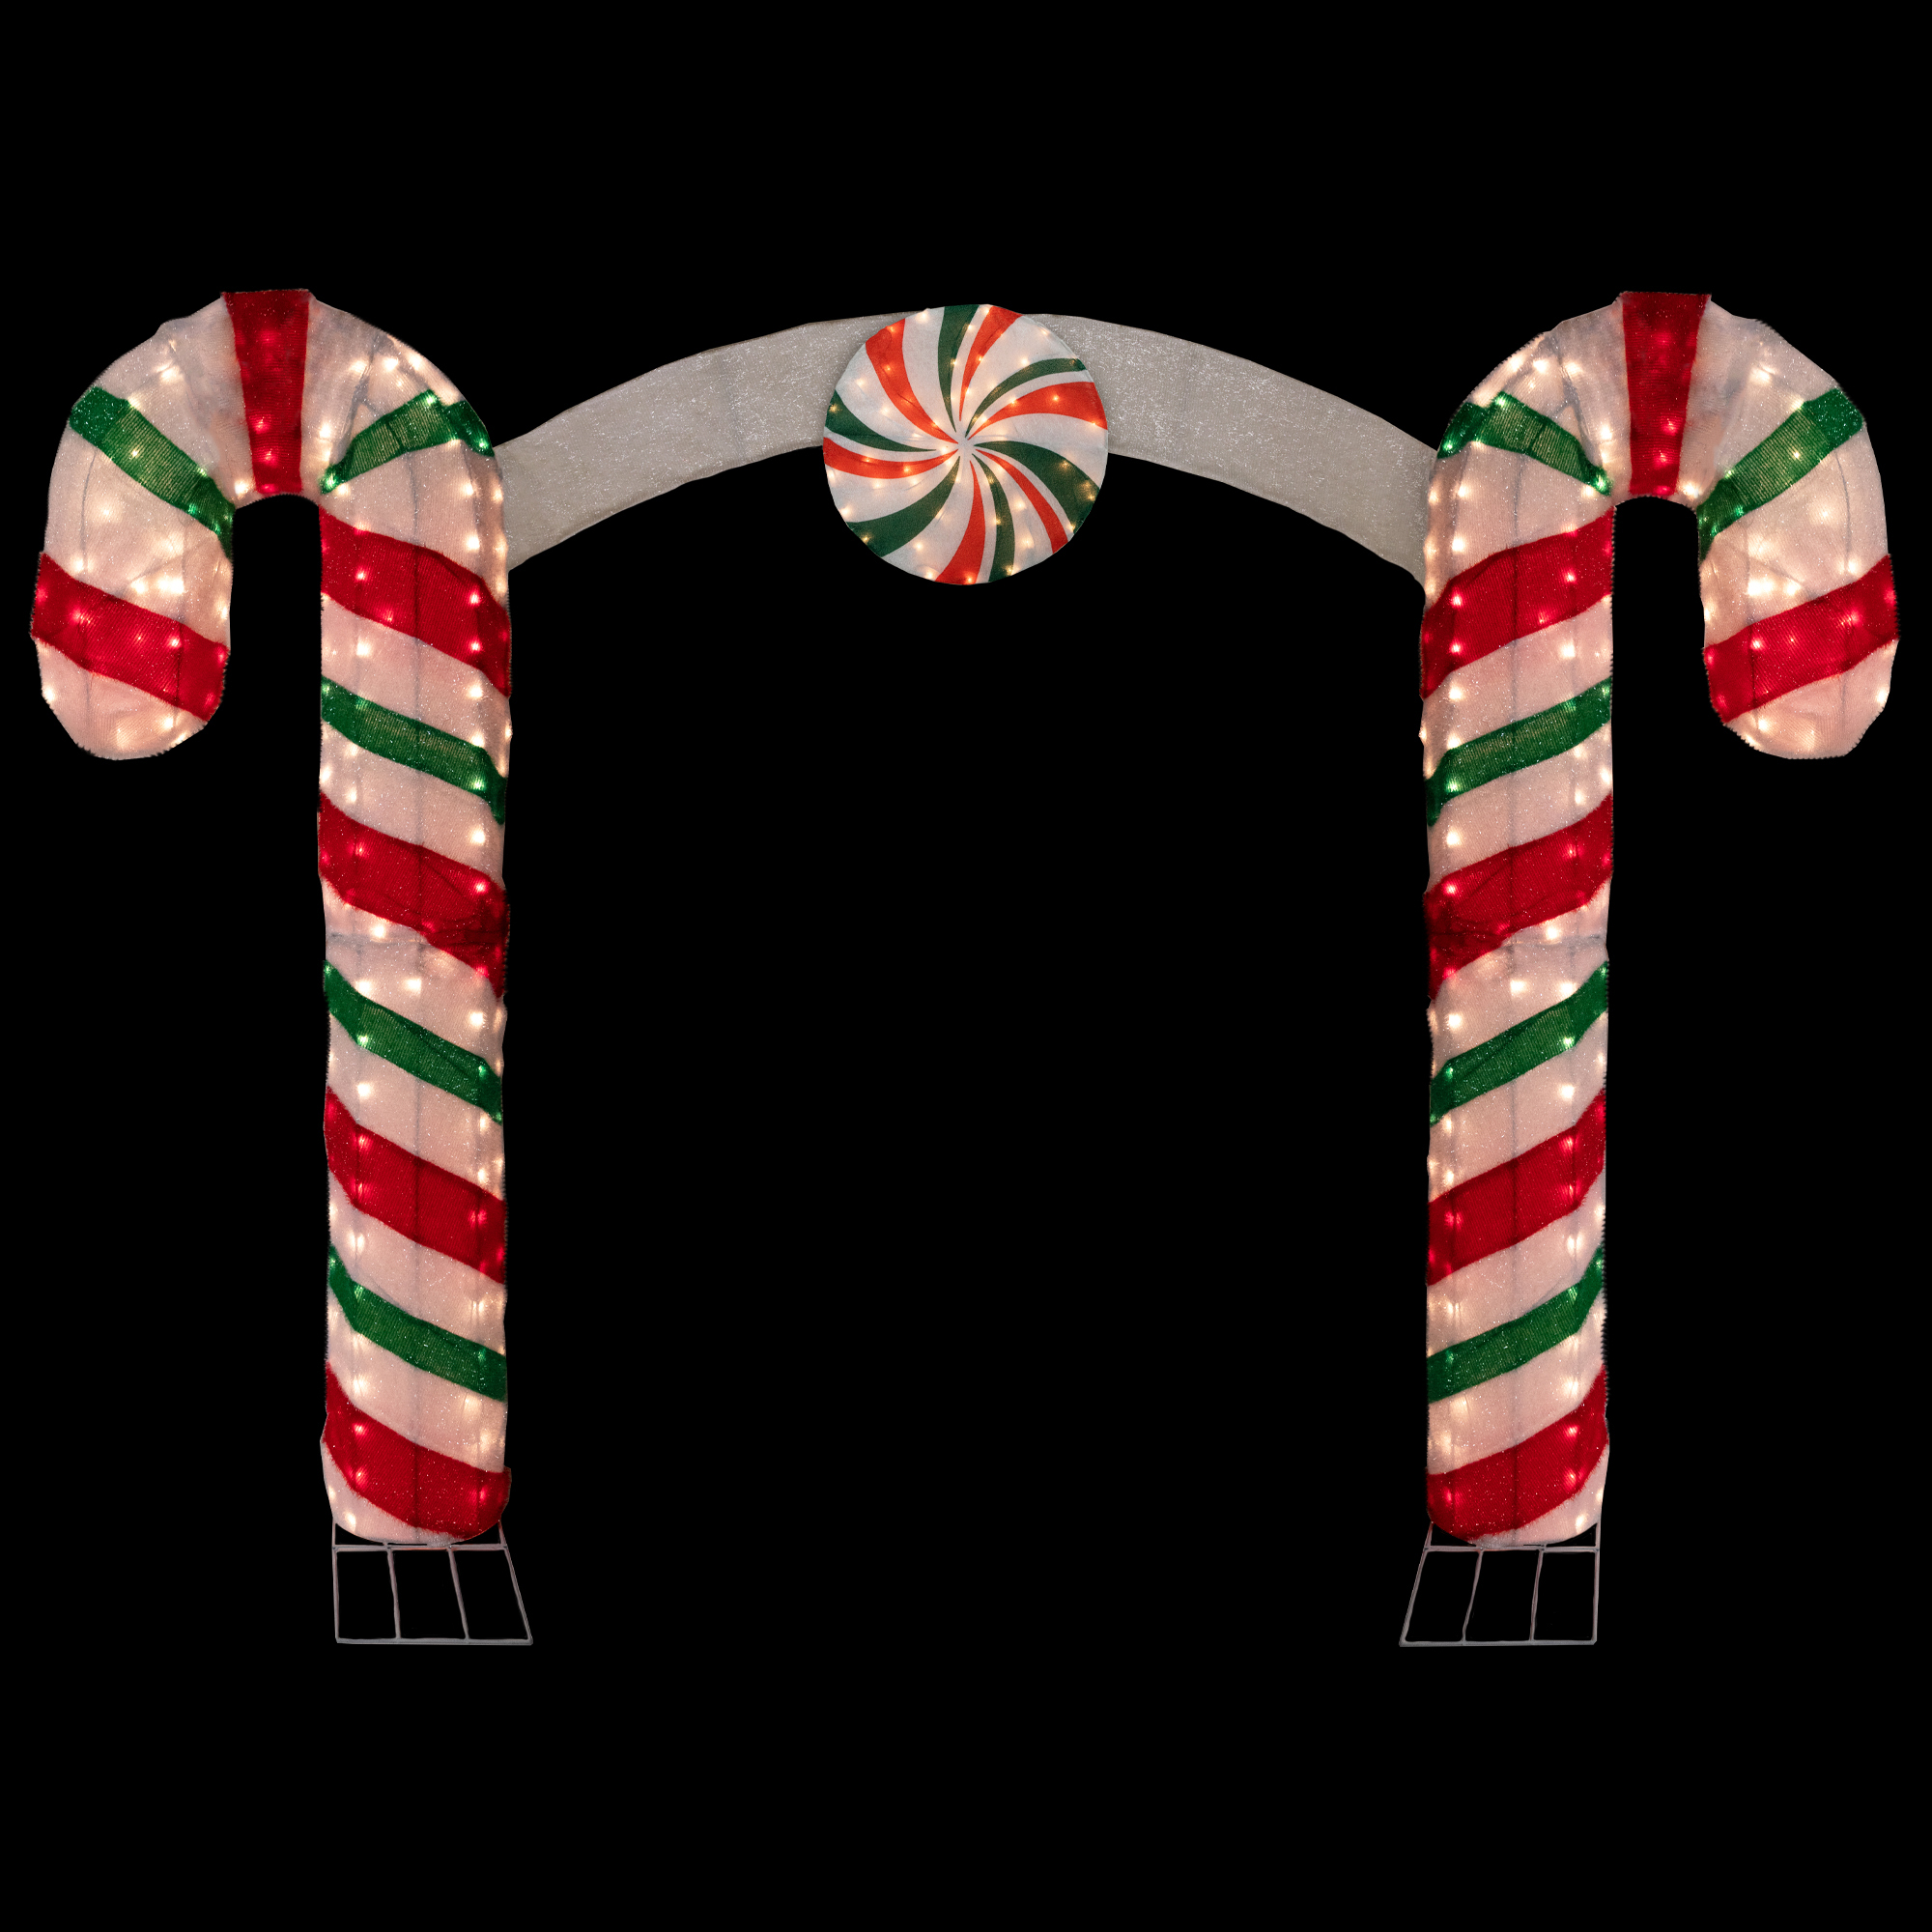 Northlight 7' Lighted Double Candy Cane Archway Outdoor Christmas Decoration